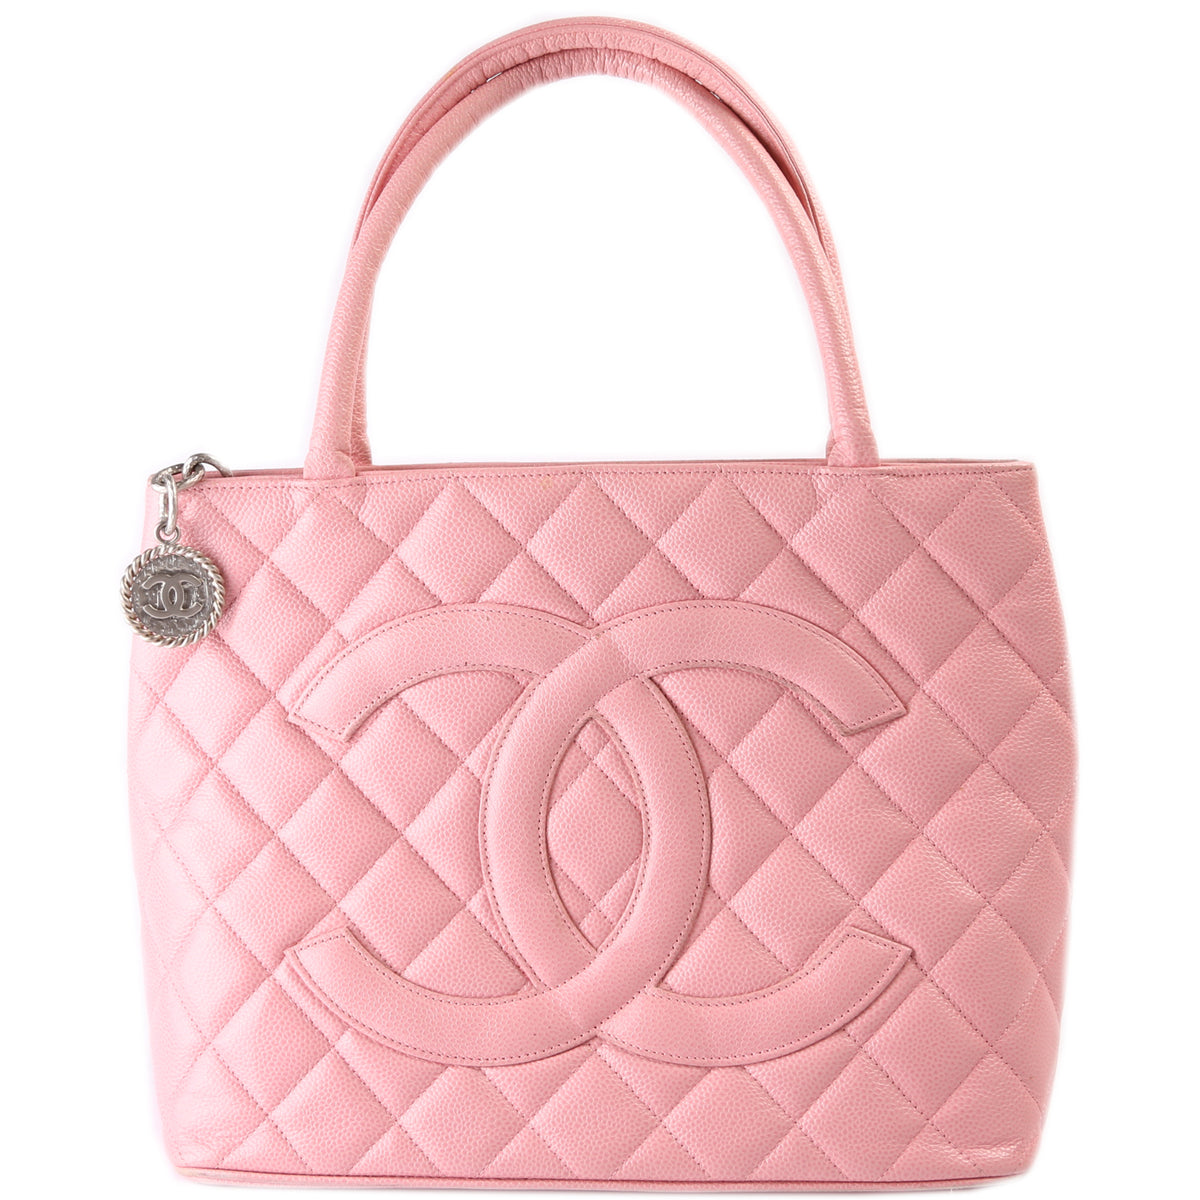 Chanel Beige Quilted Caviar Zip Medallion Tote 1cc1230